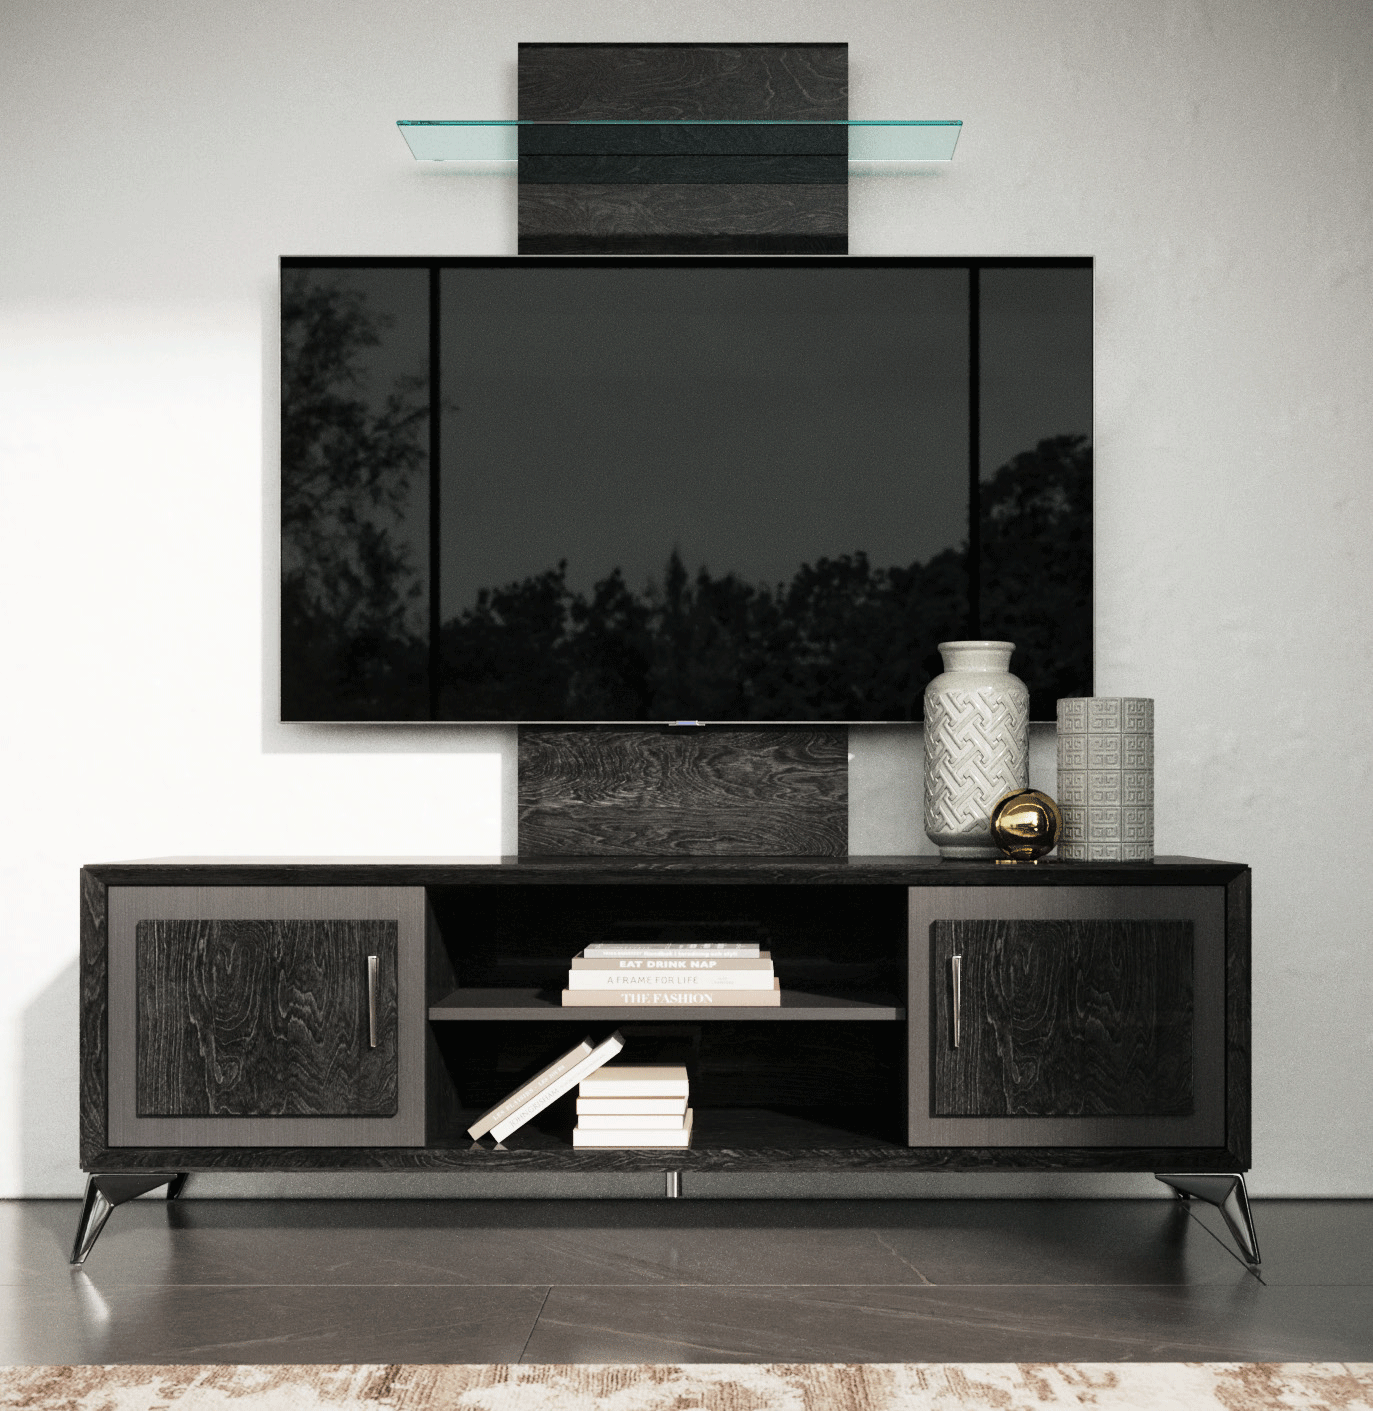 Brands Camel Modum Collection, Italy Krystal TV Cabinet + Wall Panel w/ Led light